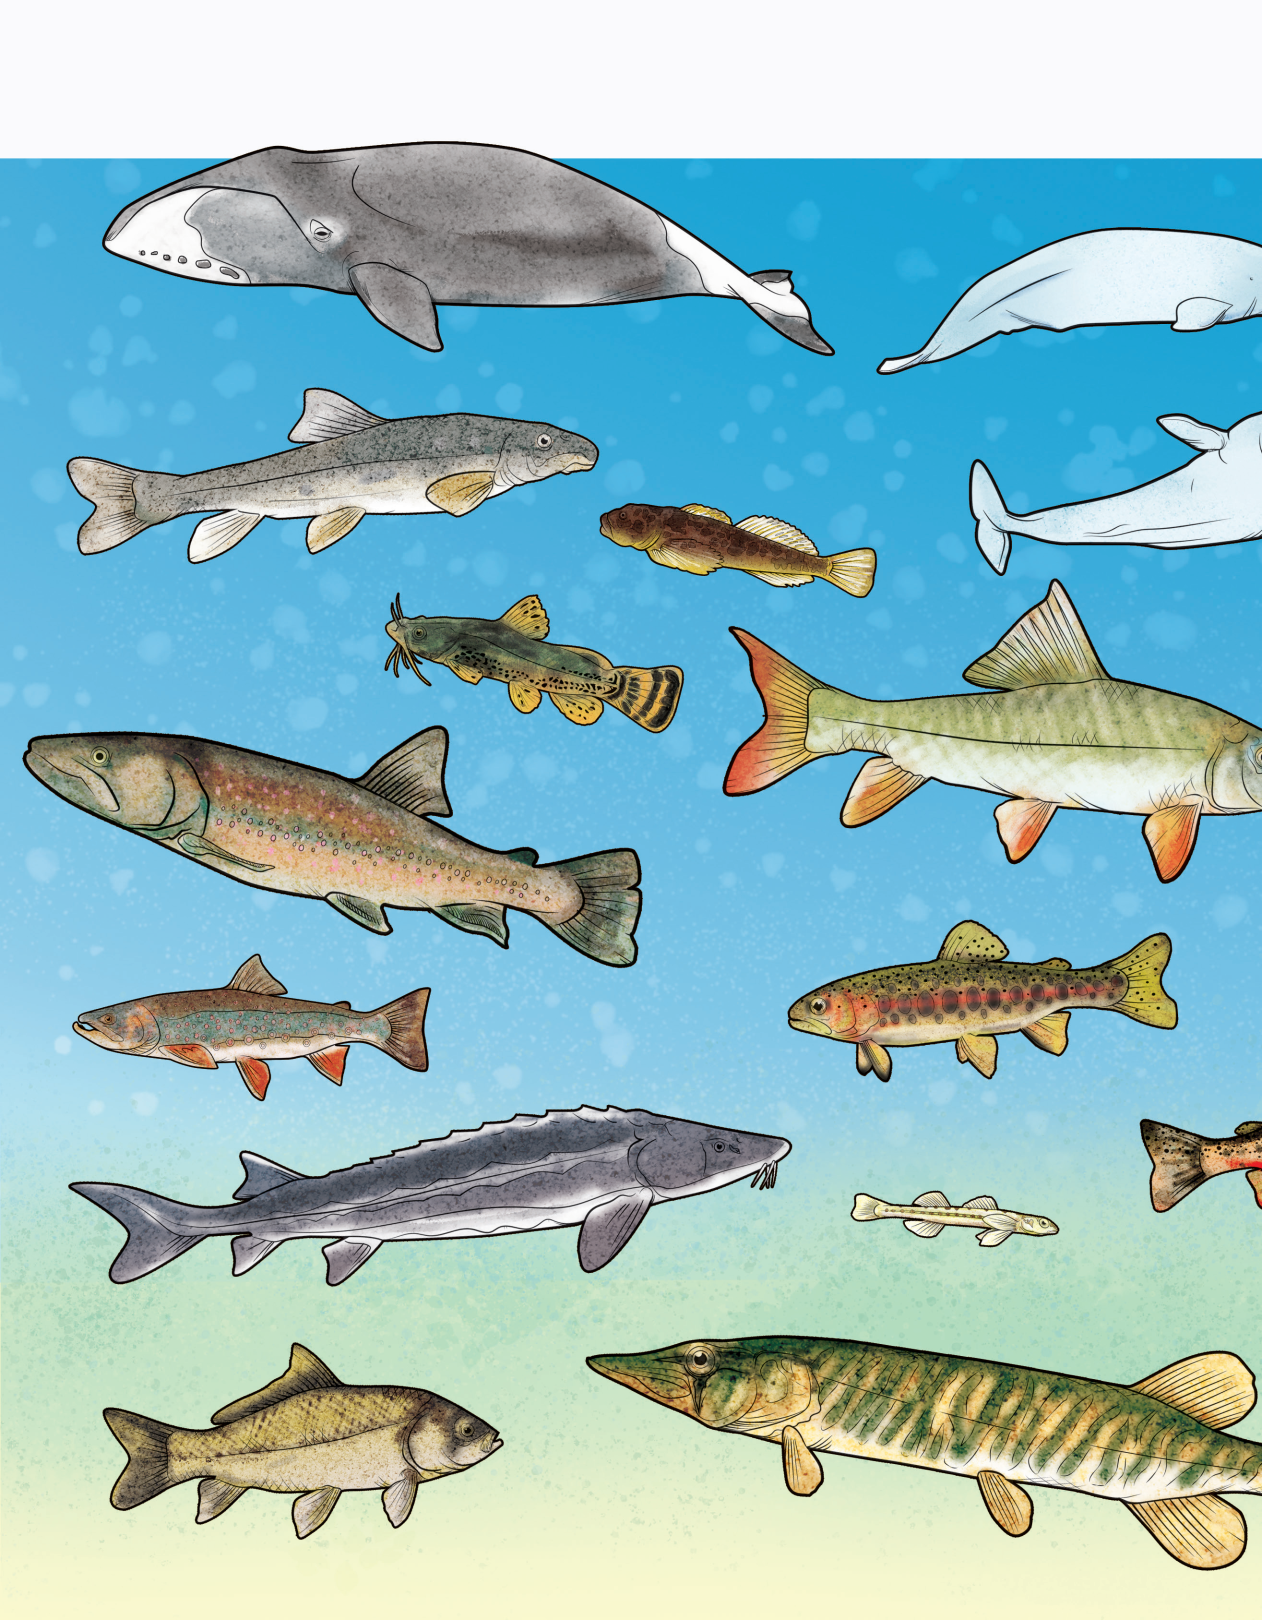 Illustration of fifteen species at risk featured in the colouring book swimming among a water column.